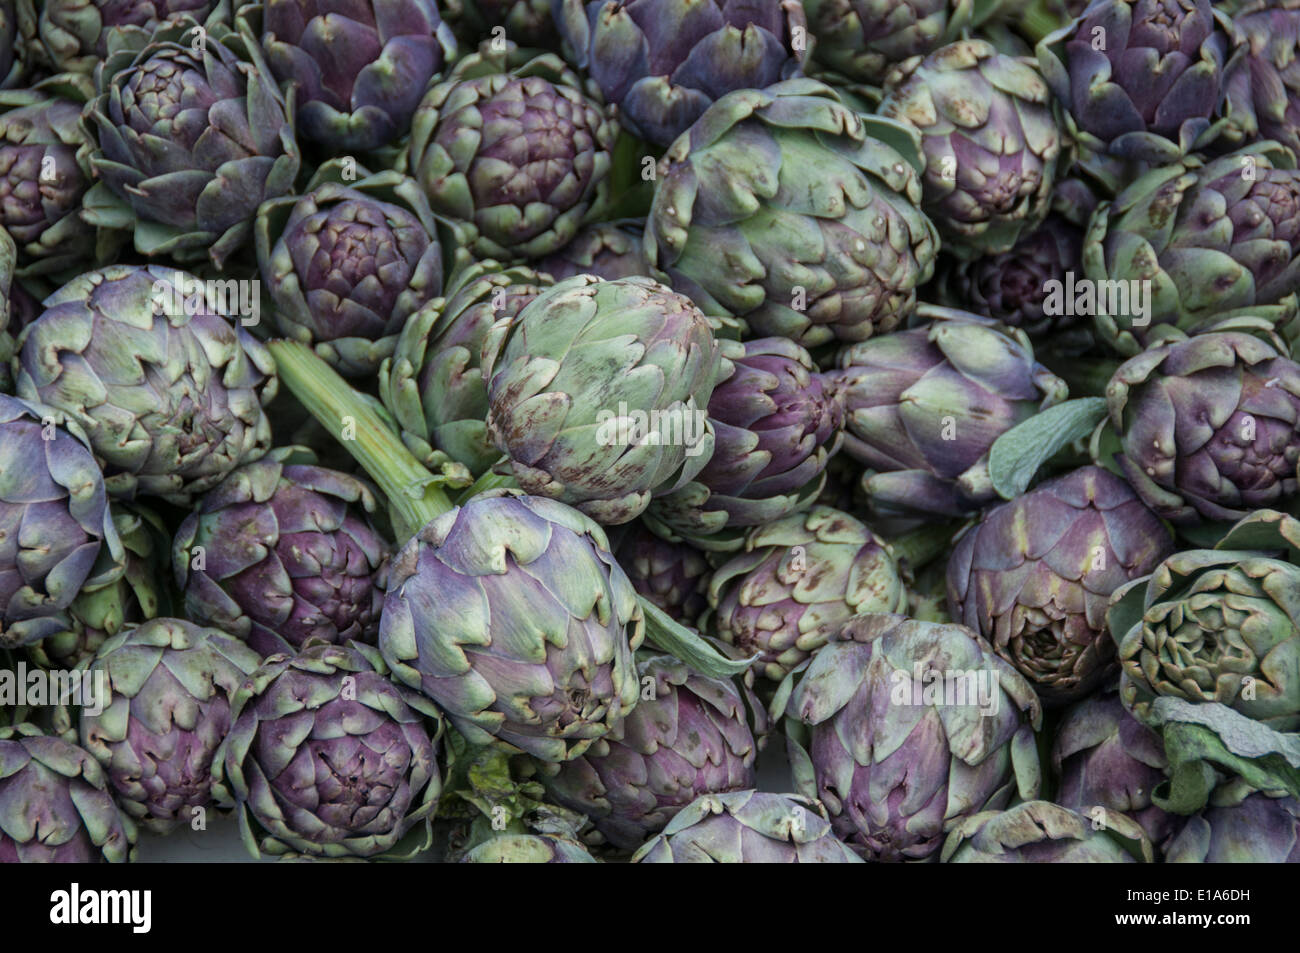 Artichokes in French market, Provence, France Stock Photo